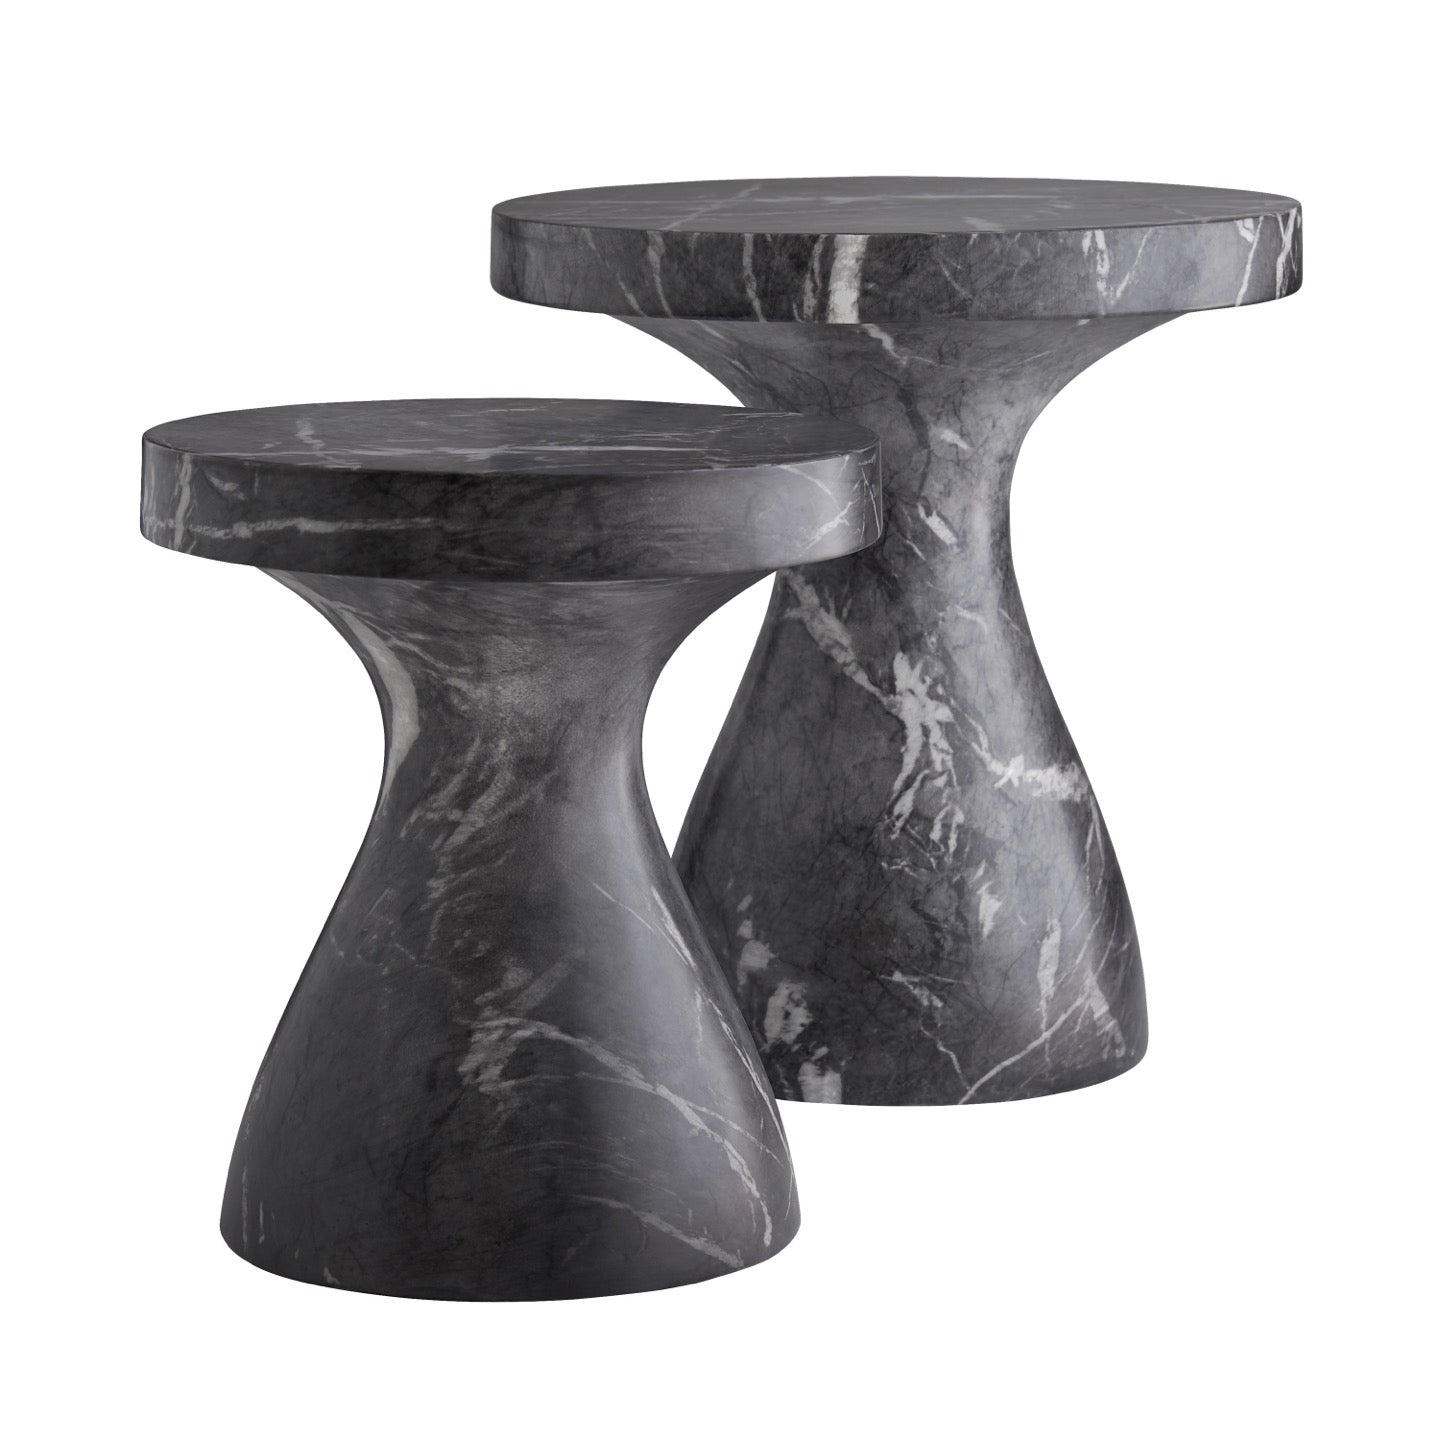 Serafina Large Accent Table - Black Faux Marble